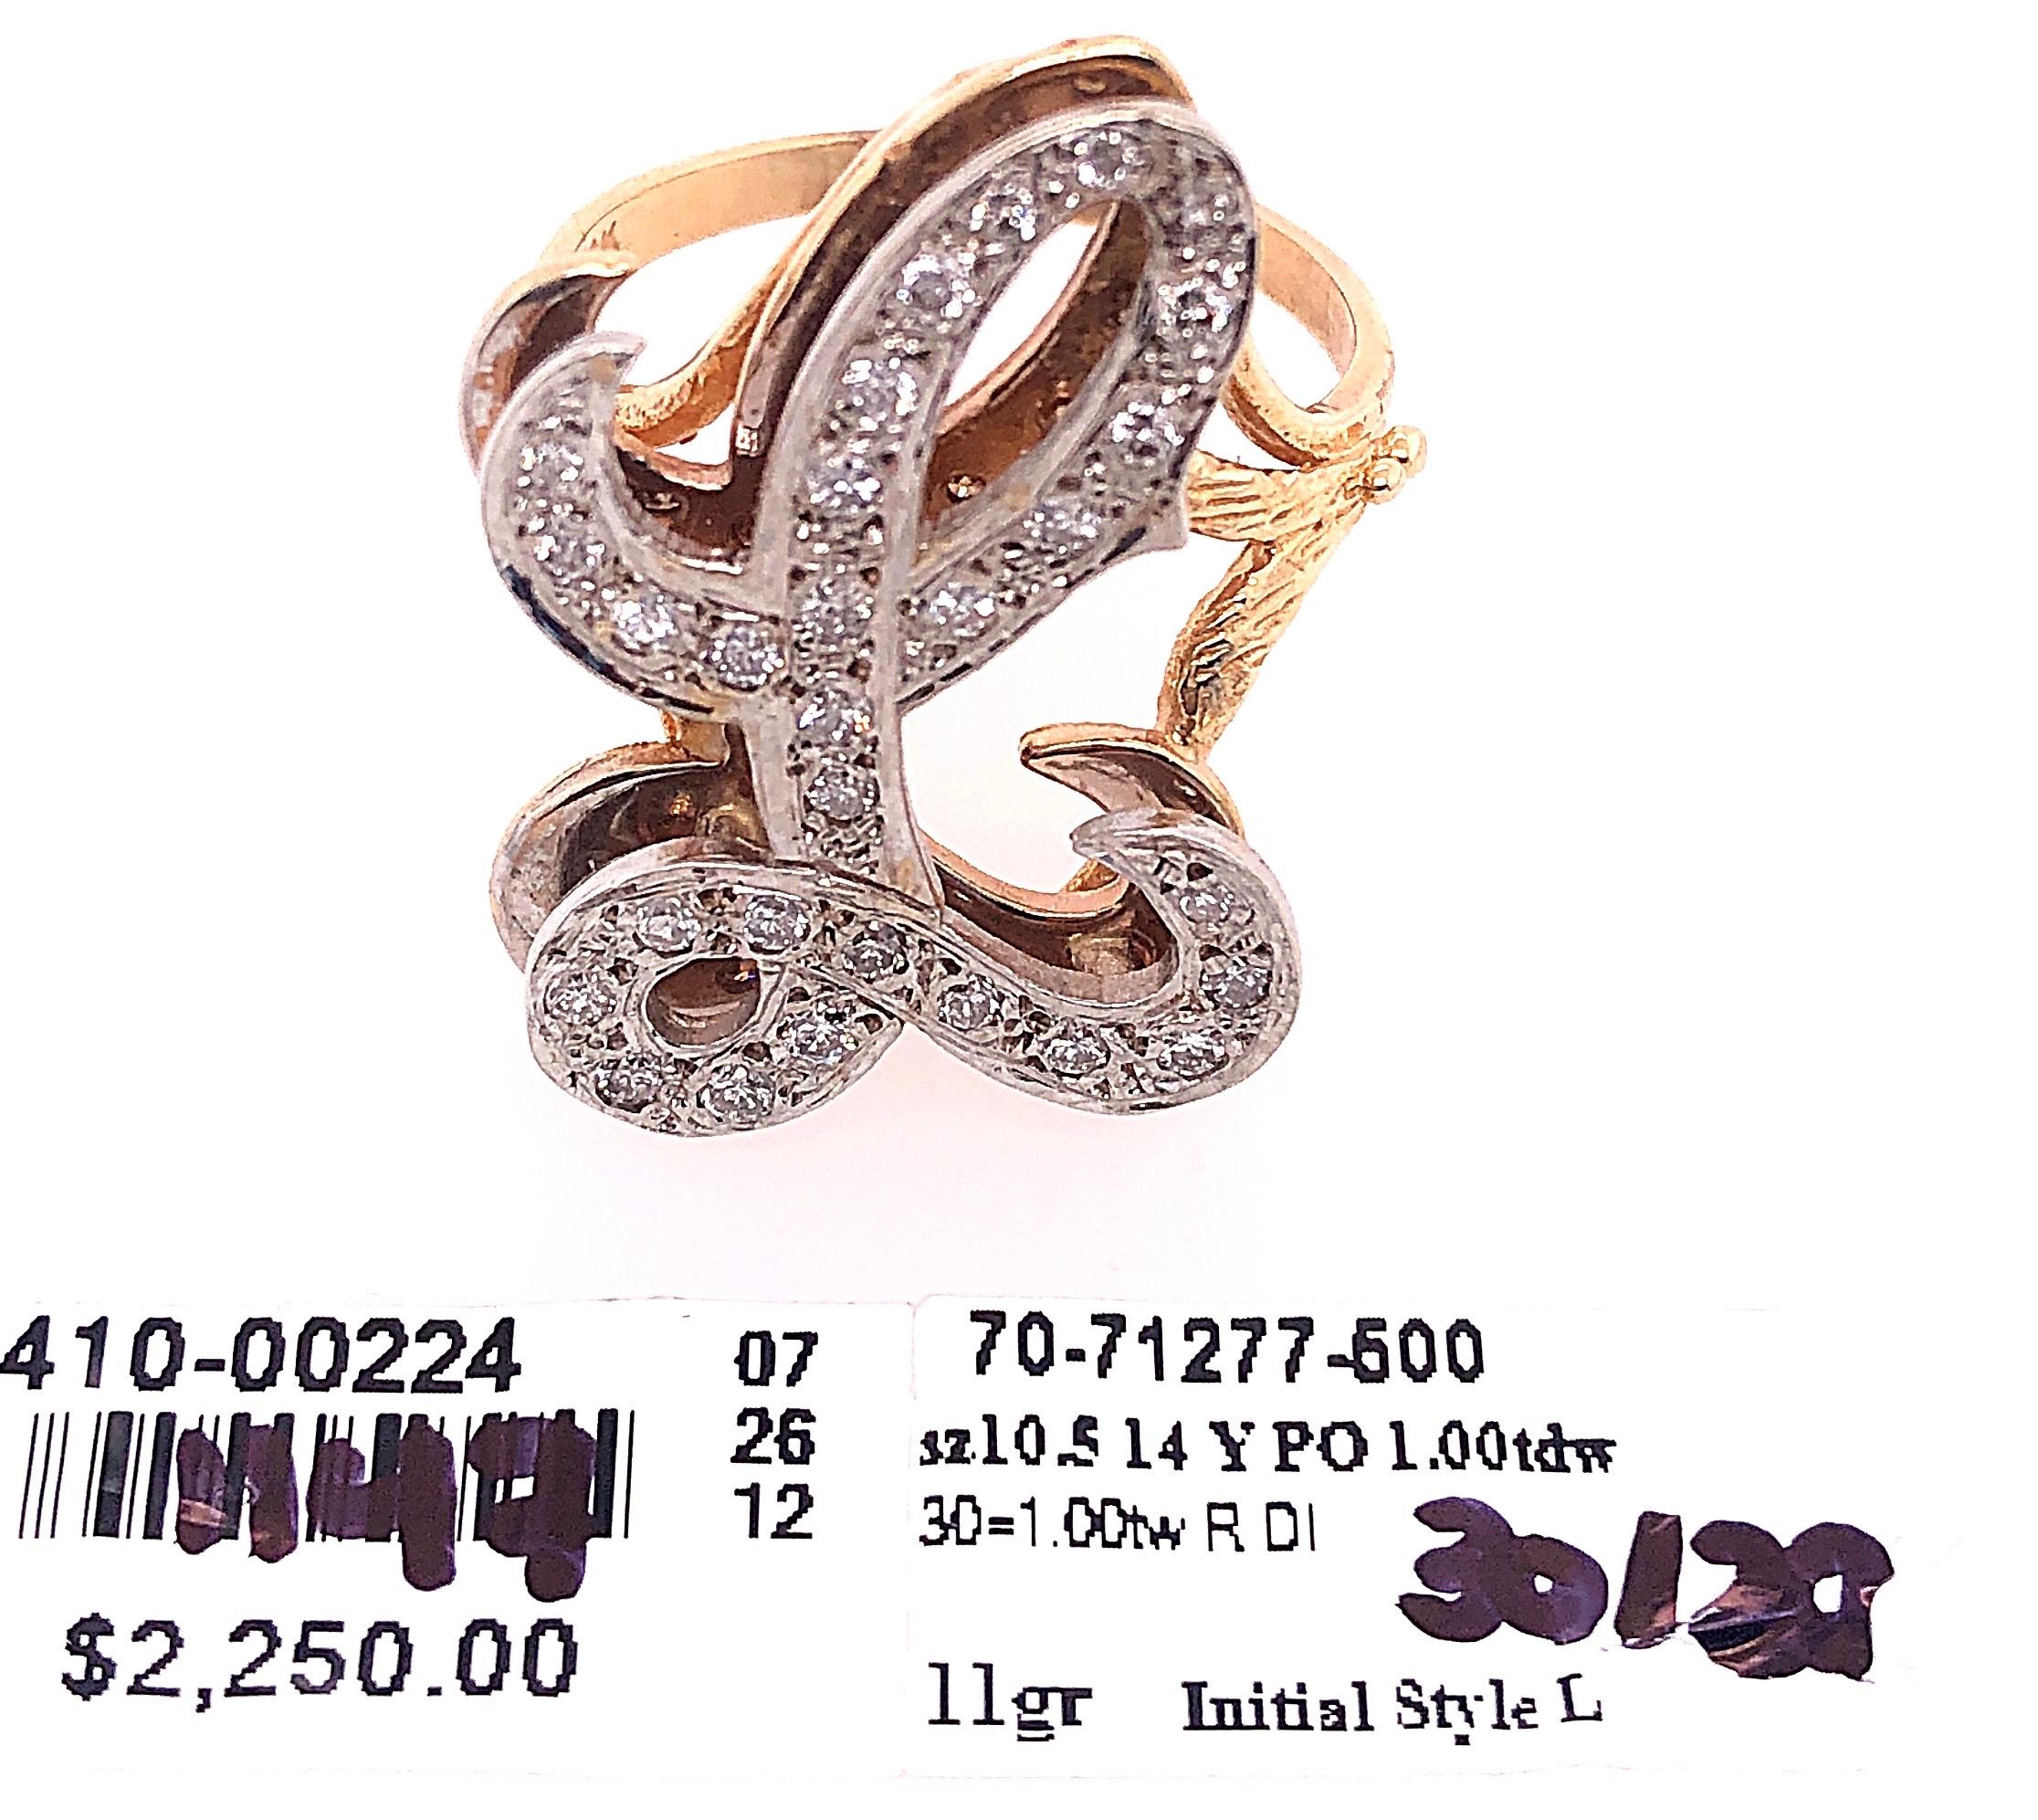 14 Karat Yellow and White Gold Initial Style 'L' Diamond Studded Ring For Sale 3